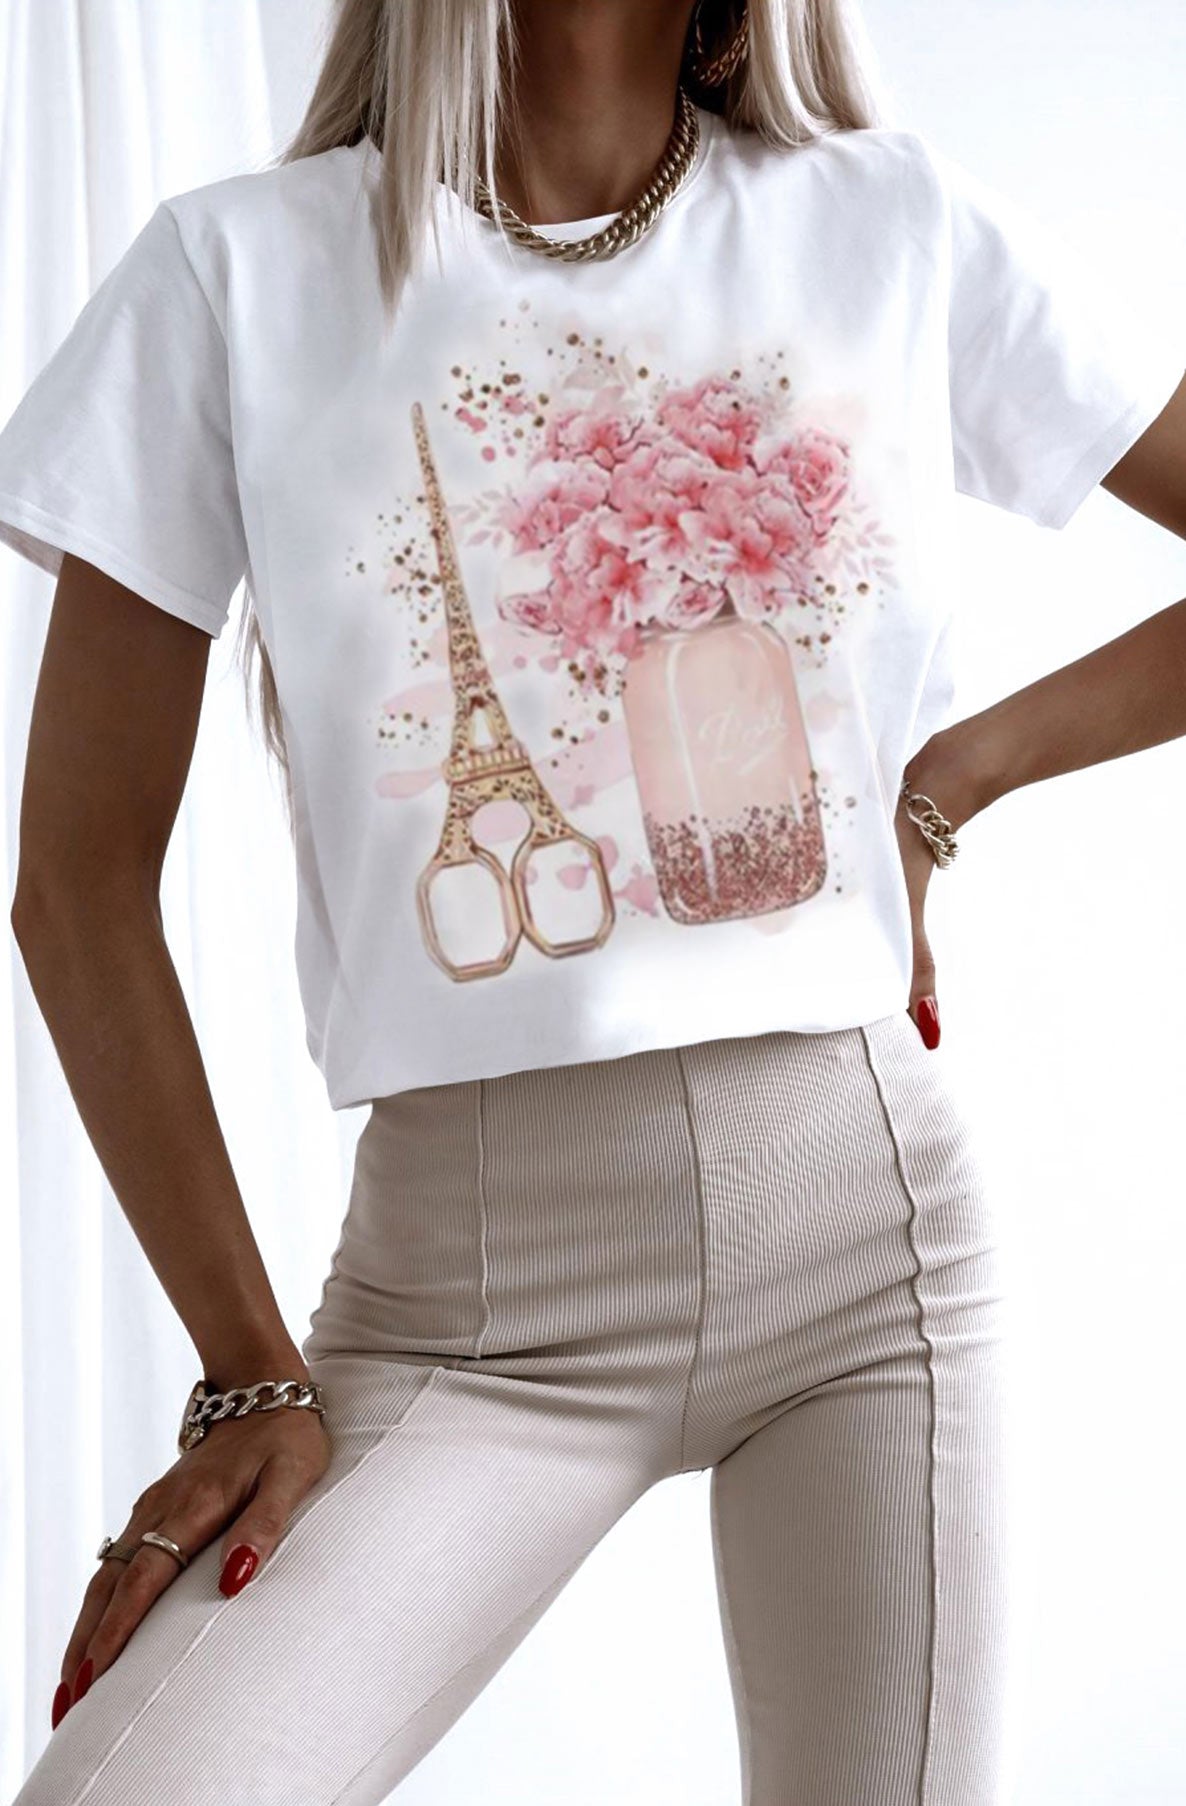 Noorie Eiffel Floral Graphic Printed T-shirt Top